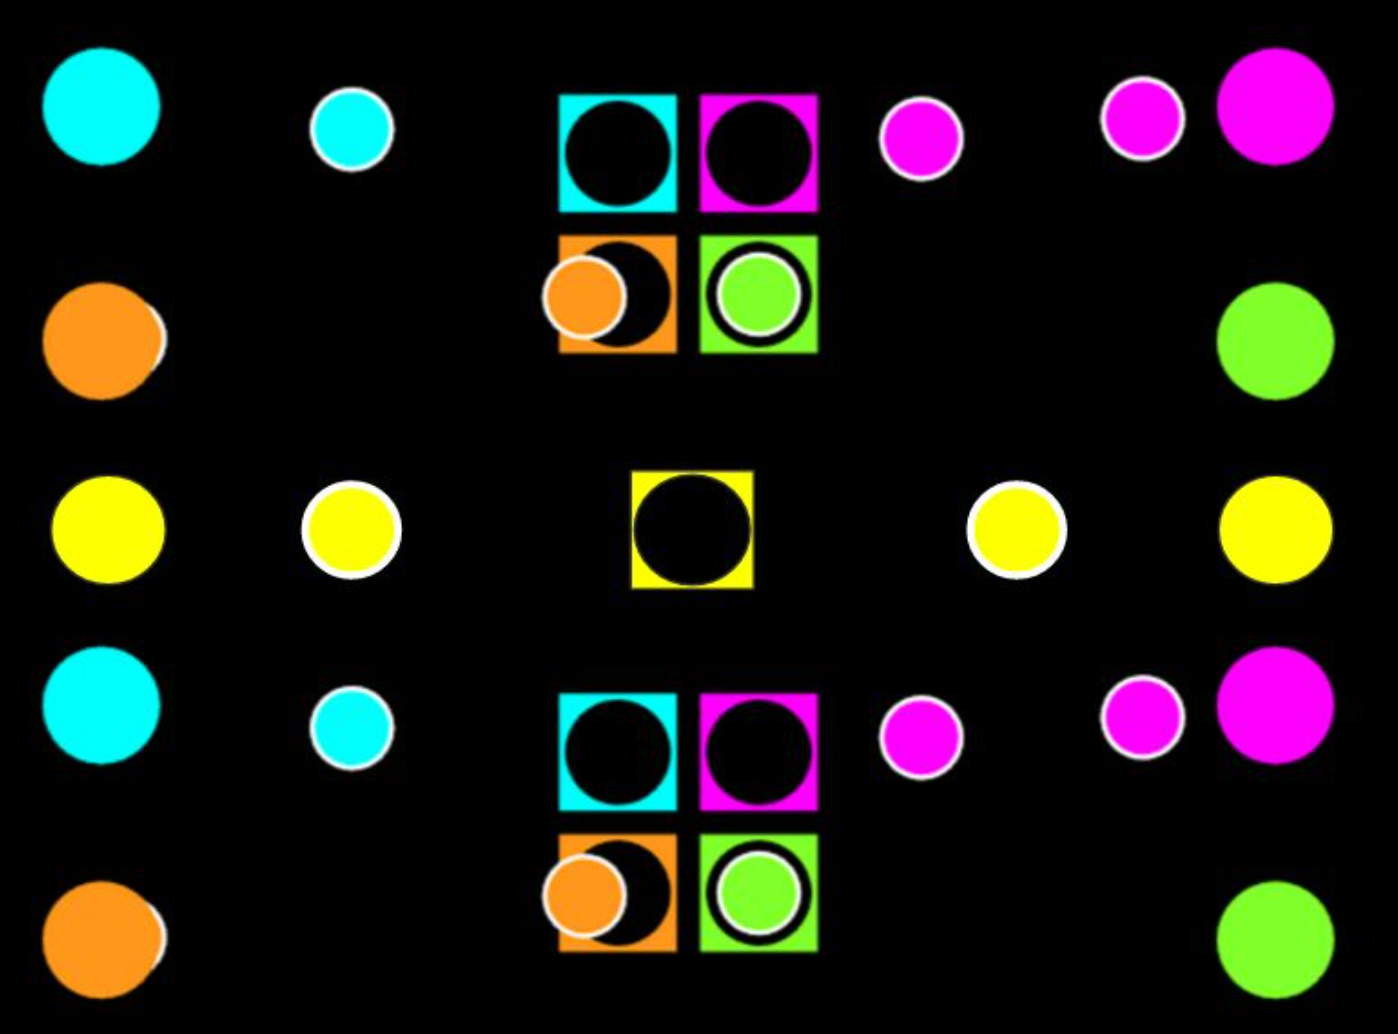 The initial two player user interface looked like two single player schemes stacked on top of each other (where player 1 is on top and player 2 is on the bottom).